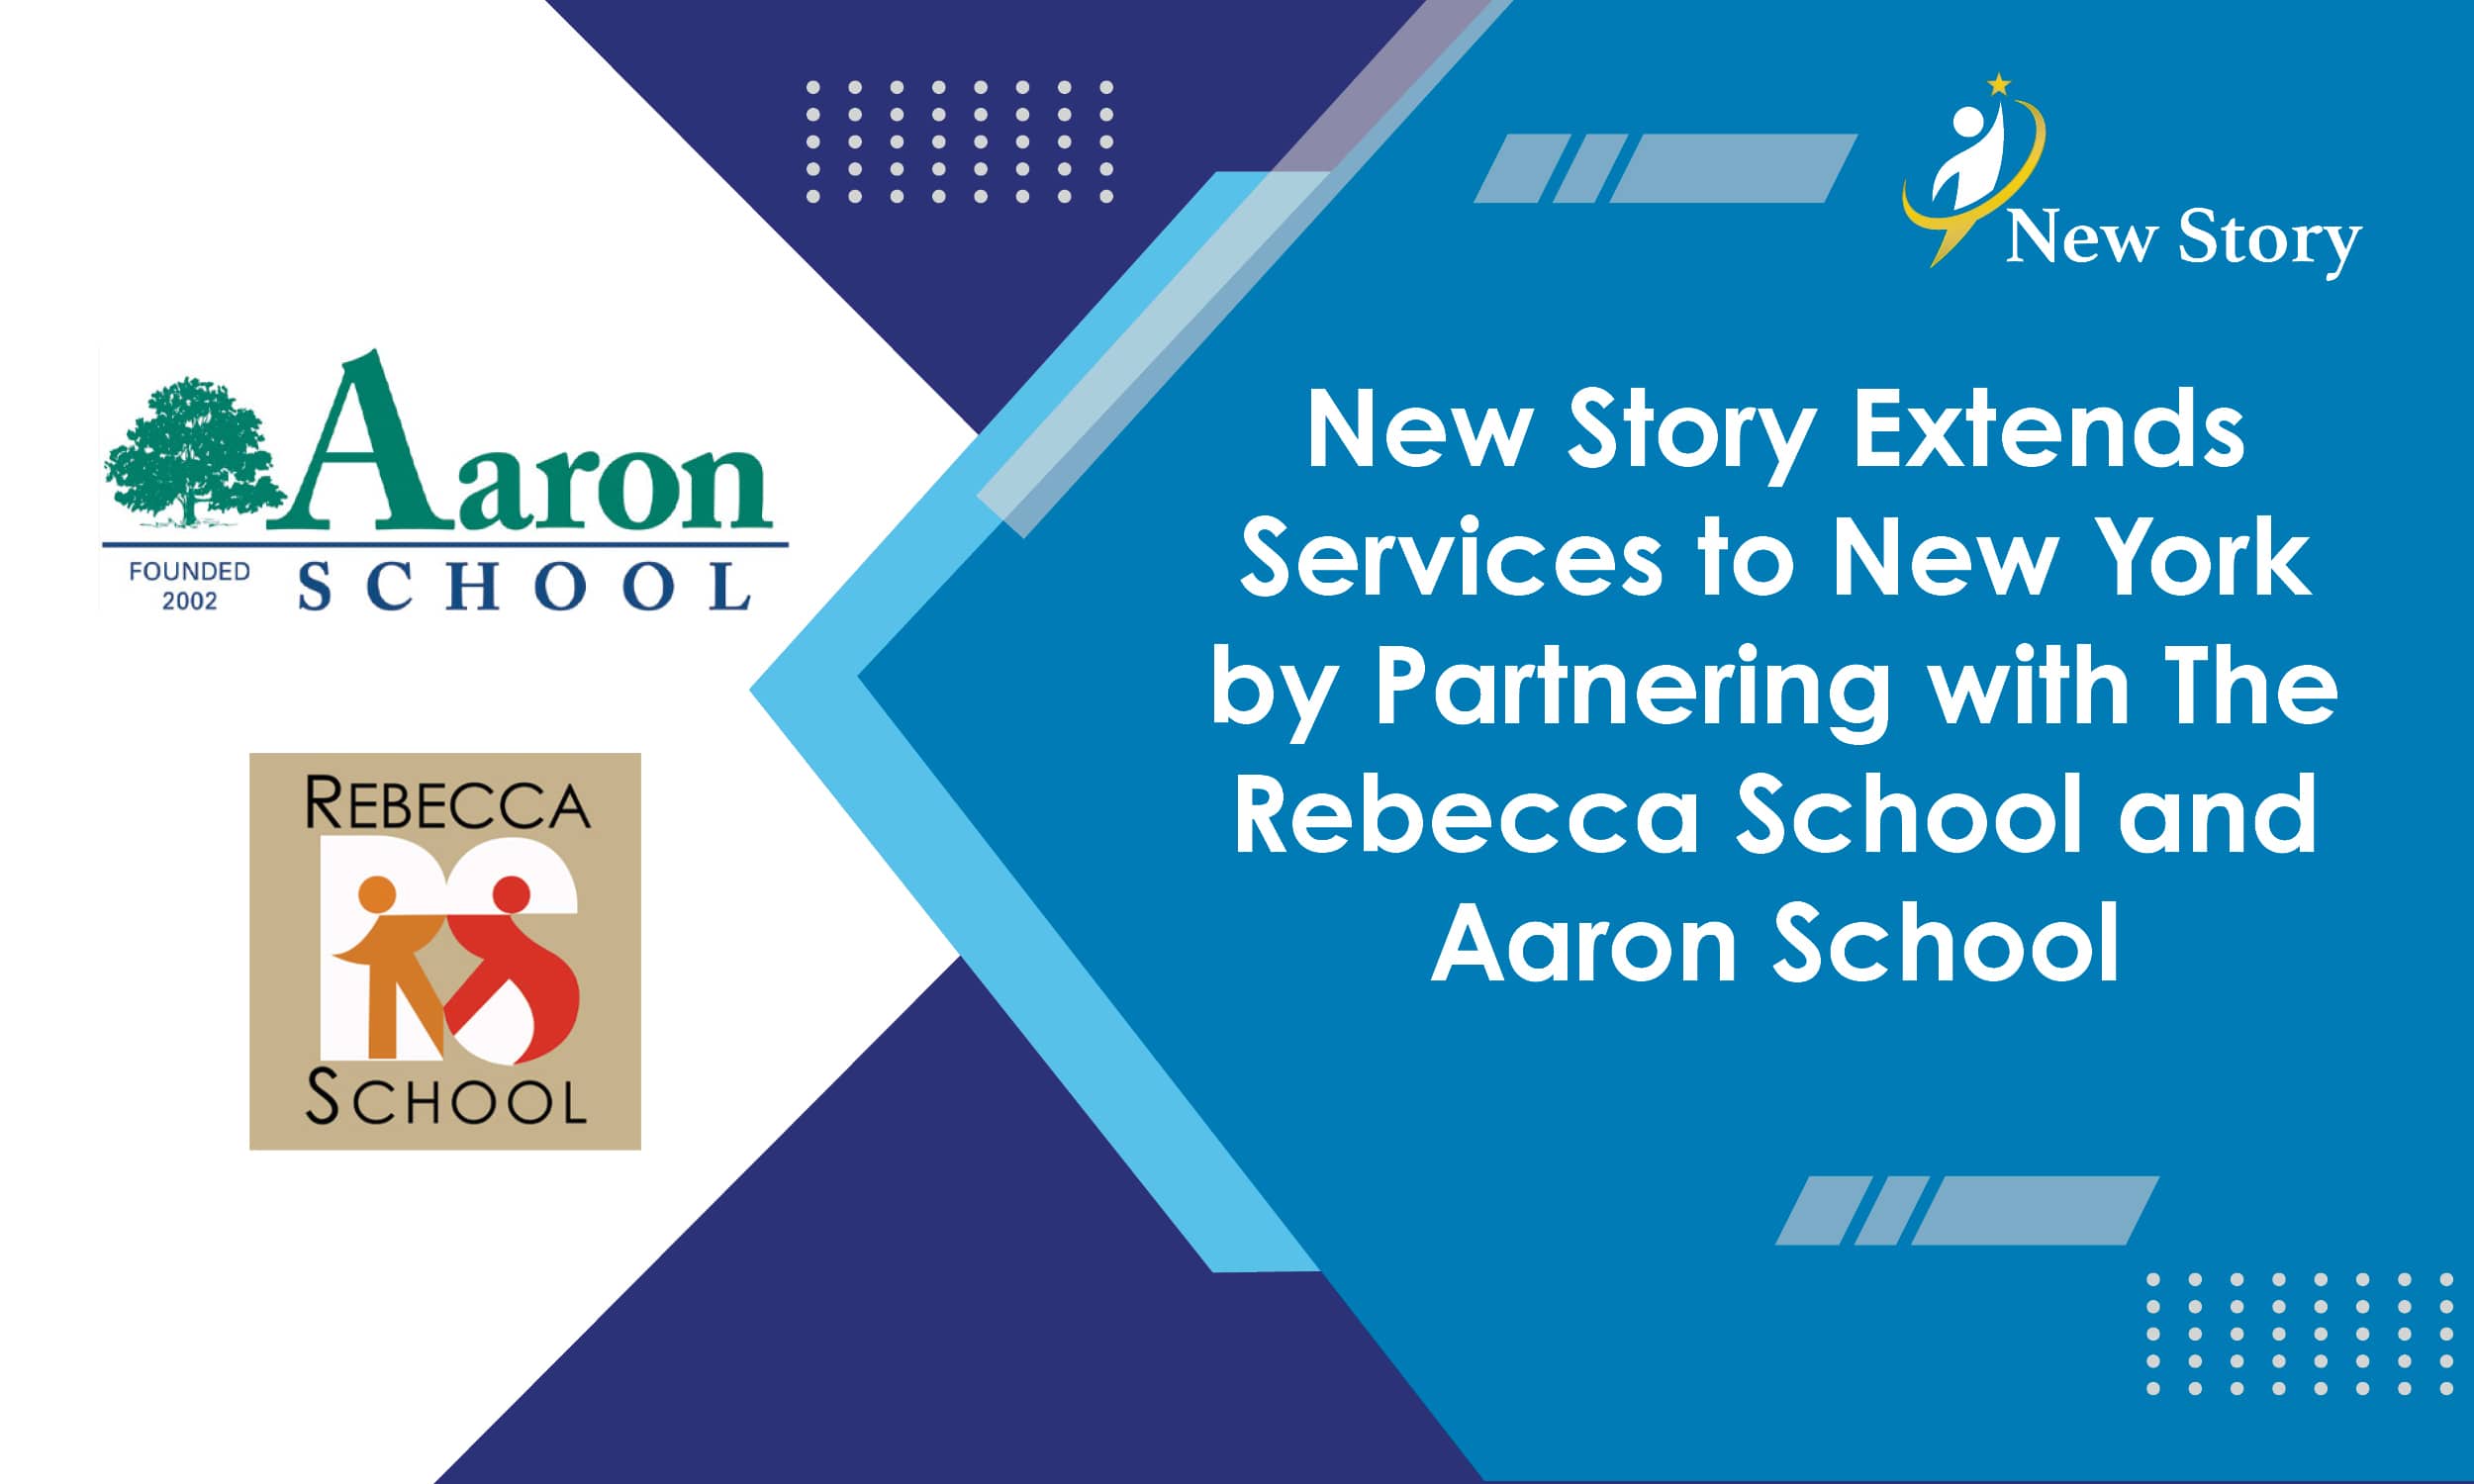 New Story Extends Services to New York by Partnering with The Rebecca School and Aaron School